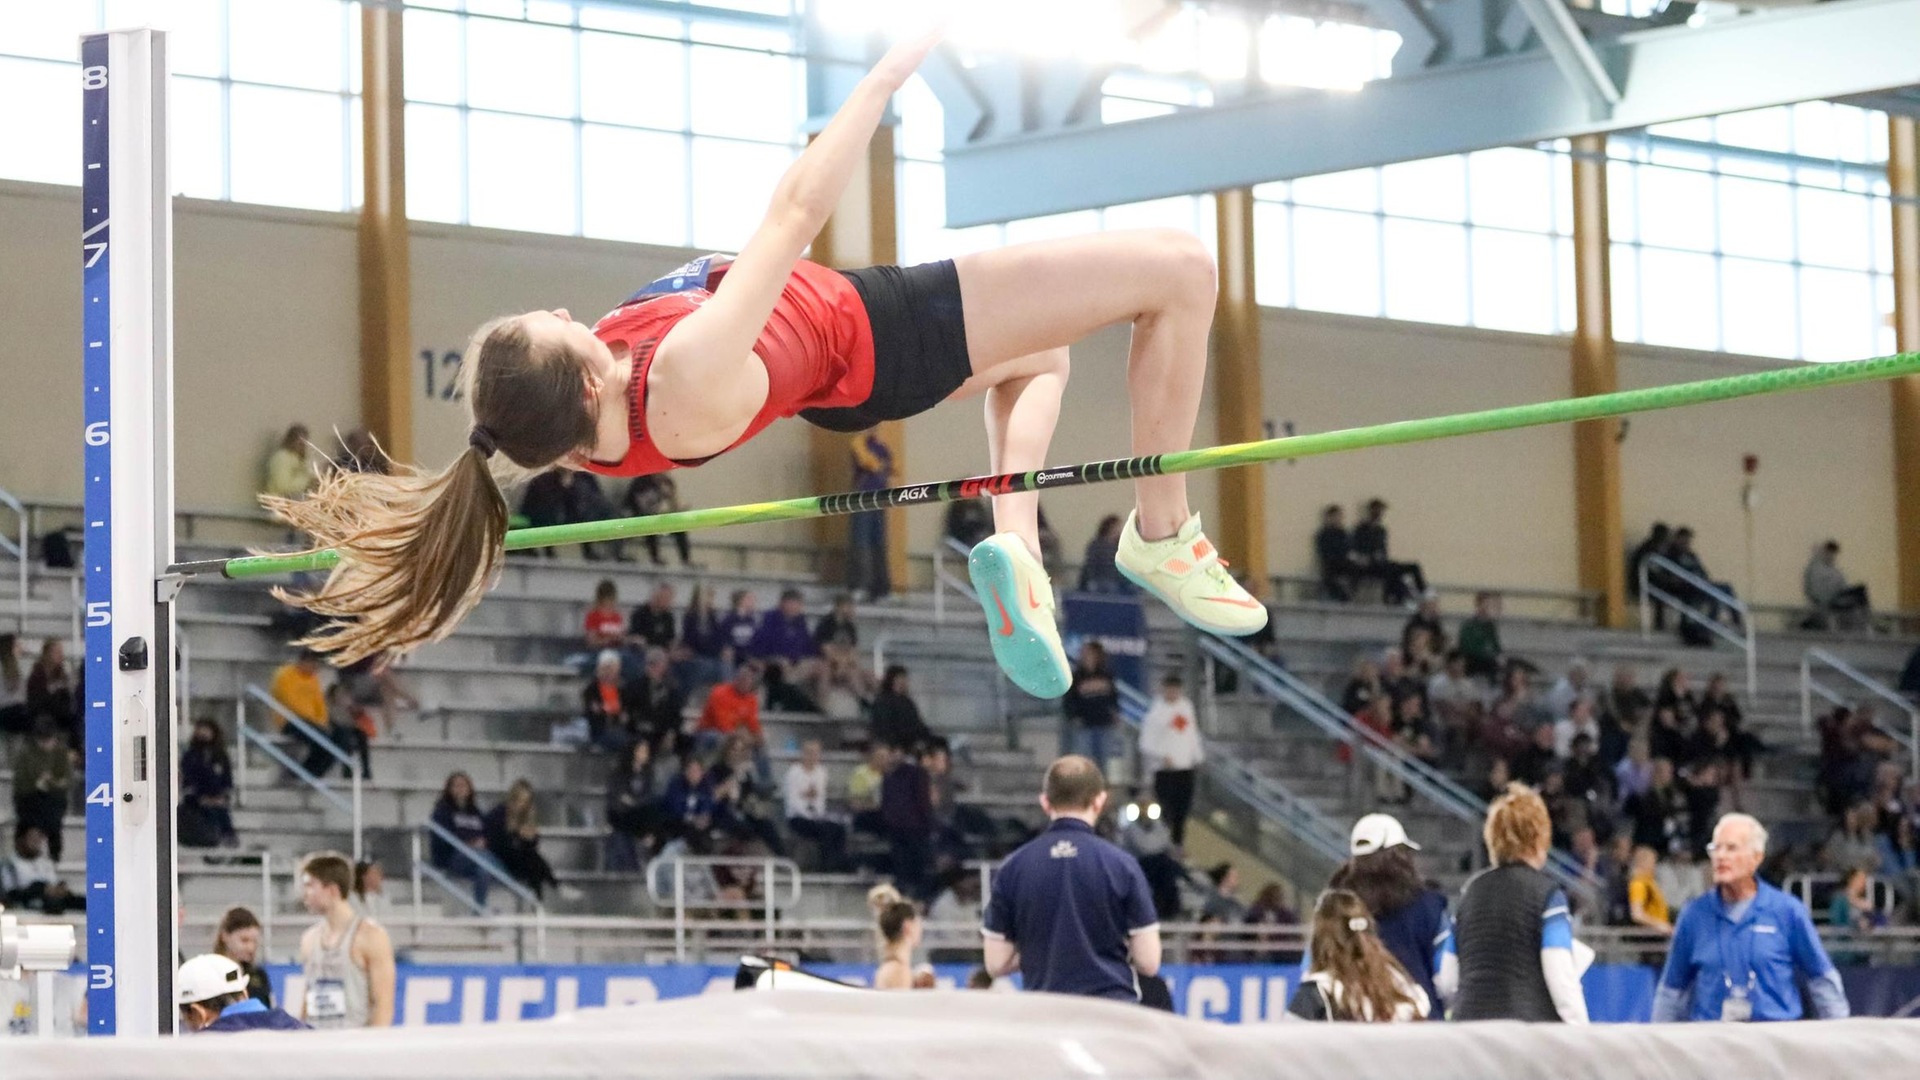 Barre Places Fourth in High Jump at NCAA Indoor Championships